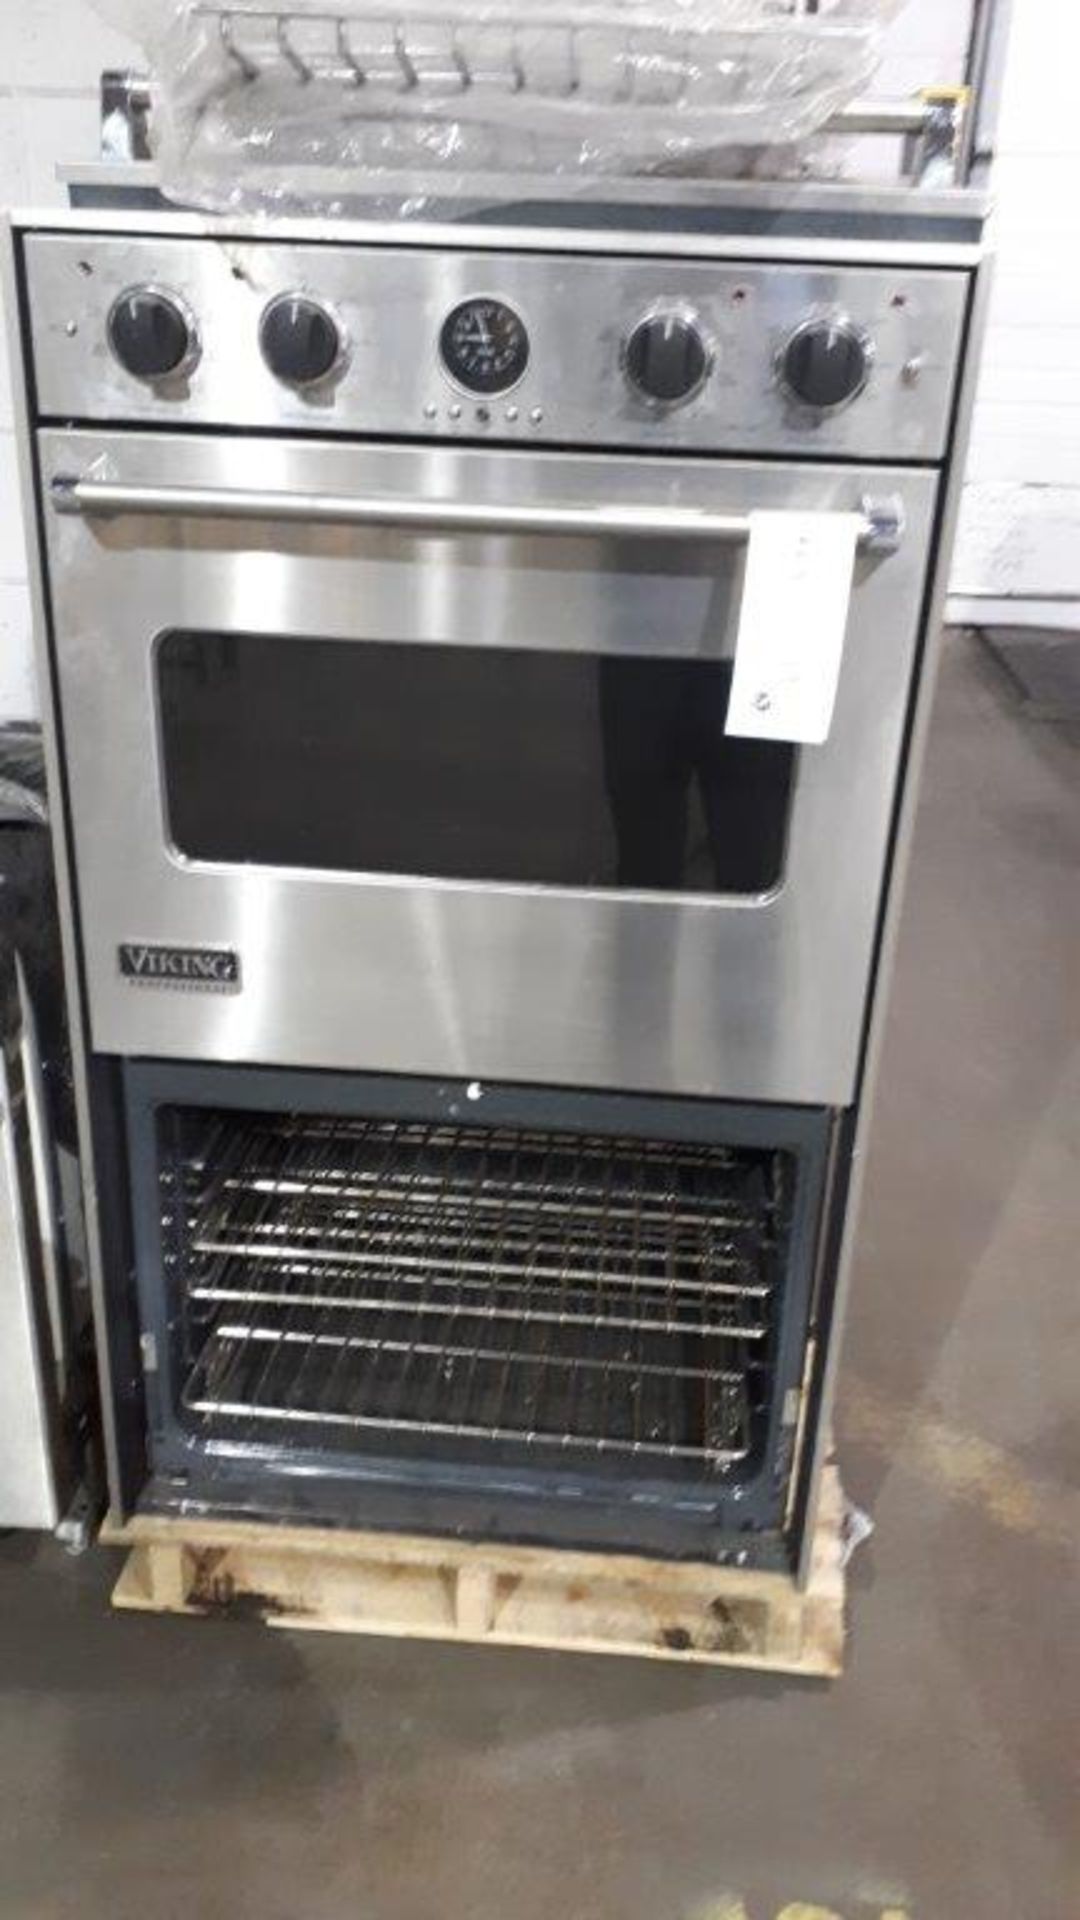 "VICKING" DOUBLE OVEN